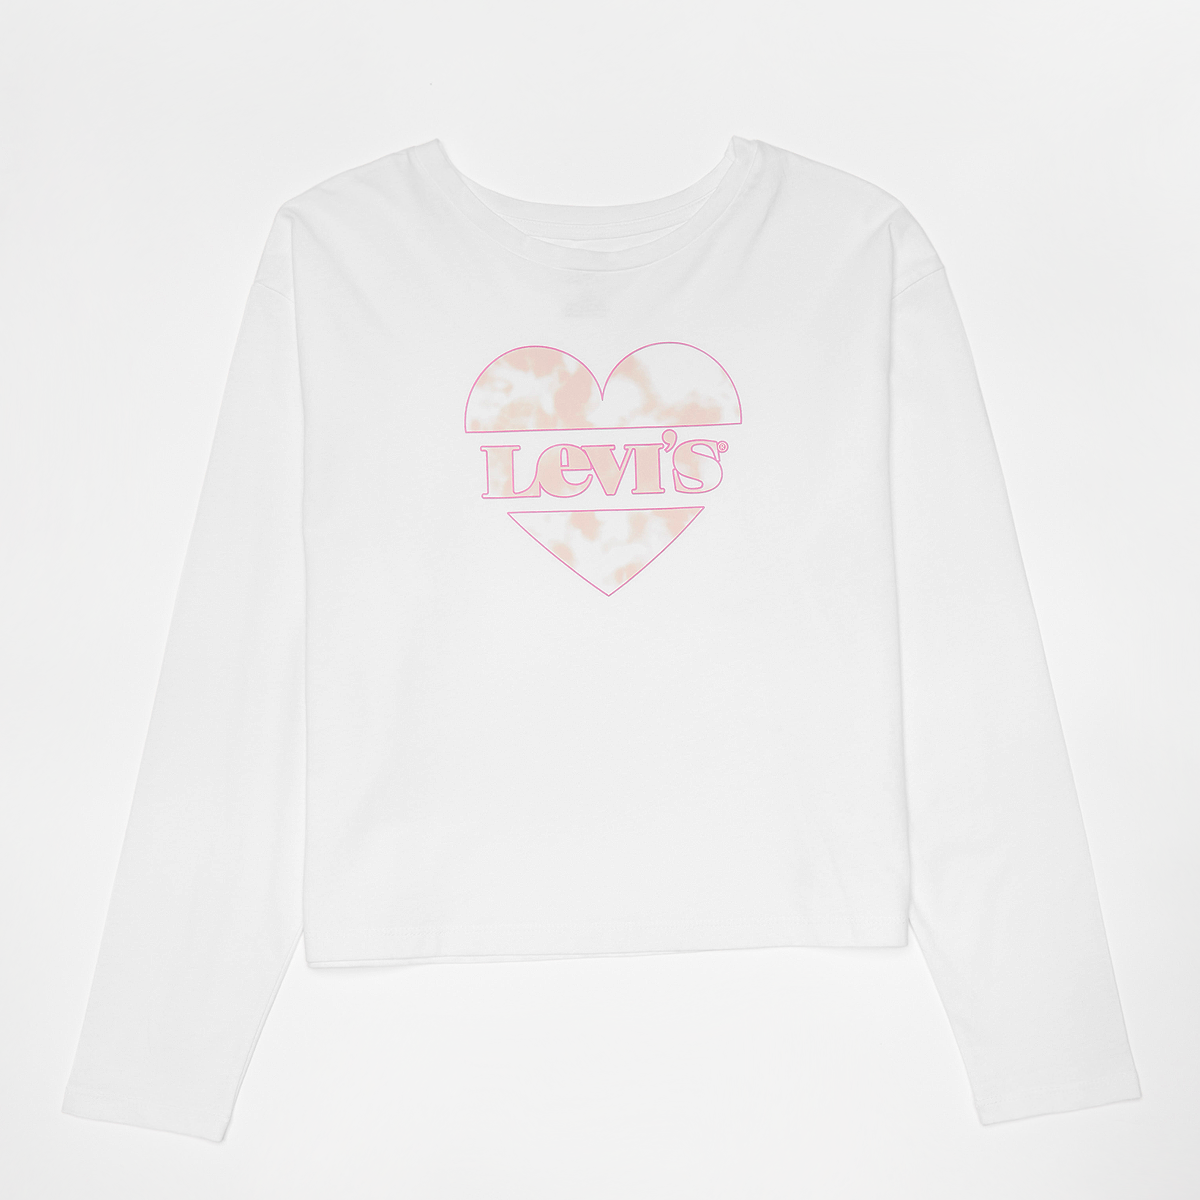 Productafbeelding: Junior LVG Cropped Long Sleeve Tee Shirt